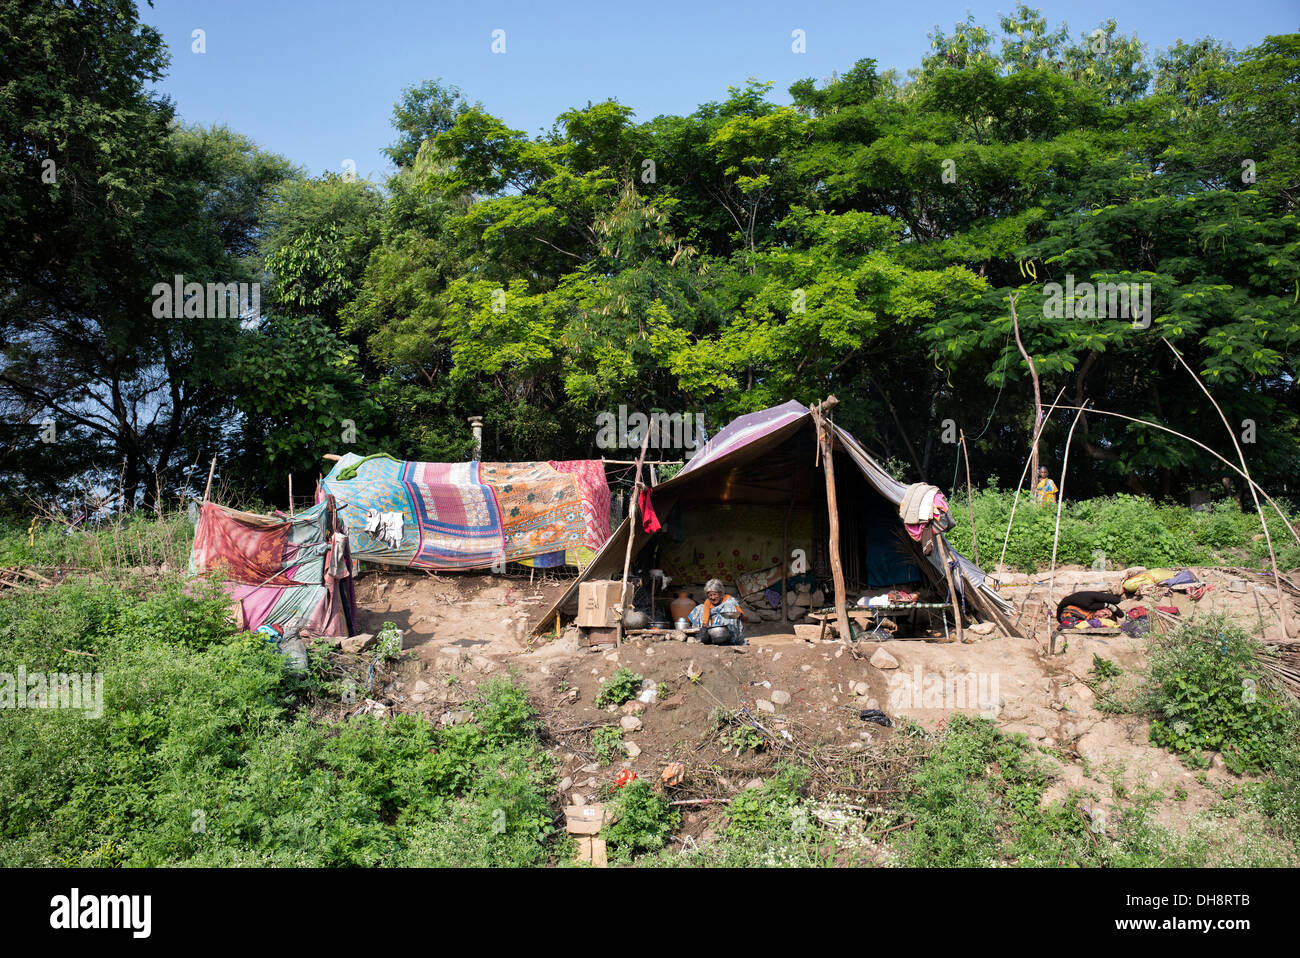 Lower caste Indian woman sitting by her bender / tent / shelter. Andhra Pradesh, India. Stock Photo